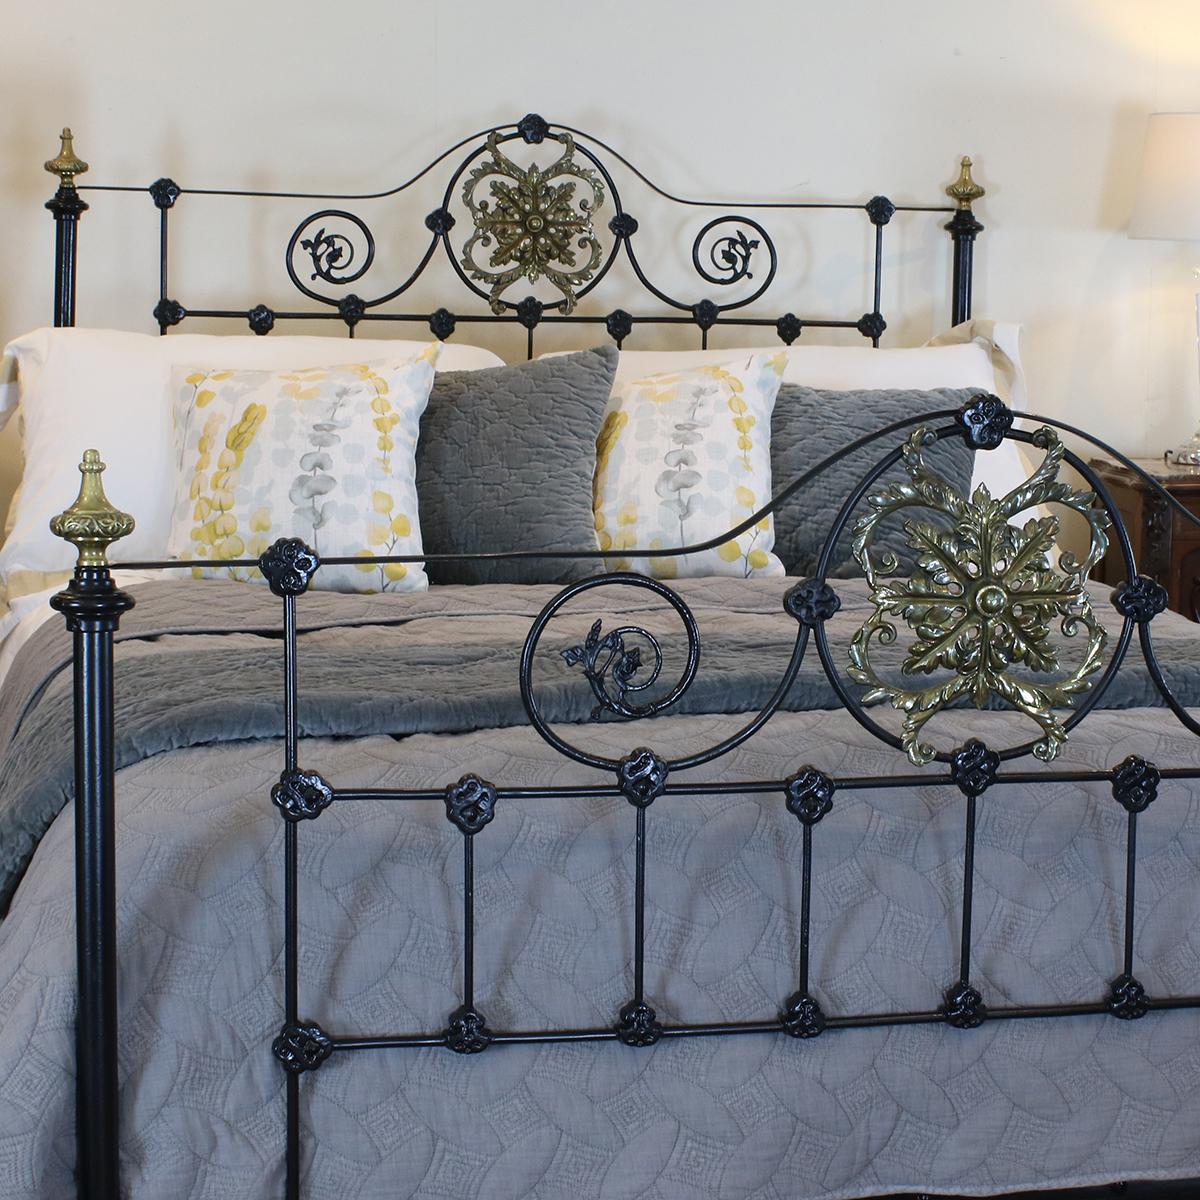 A cast iron bed with decorative panels and cast brass central plaques and finials.

This bed accepts a British king size or American queen size (5ft wide, 60 inches or 150 cm) base and mattress set.

The price is for the bed frame alone. The